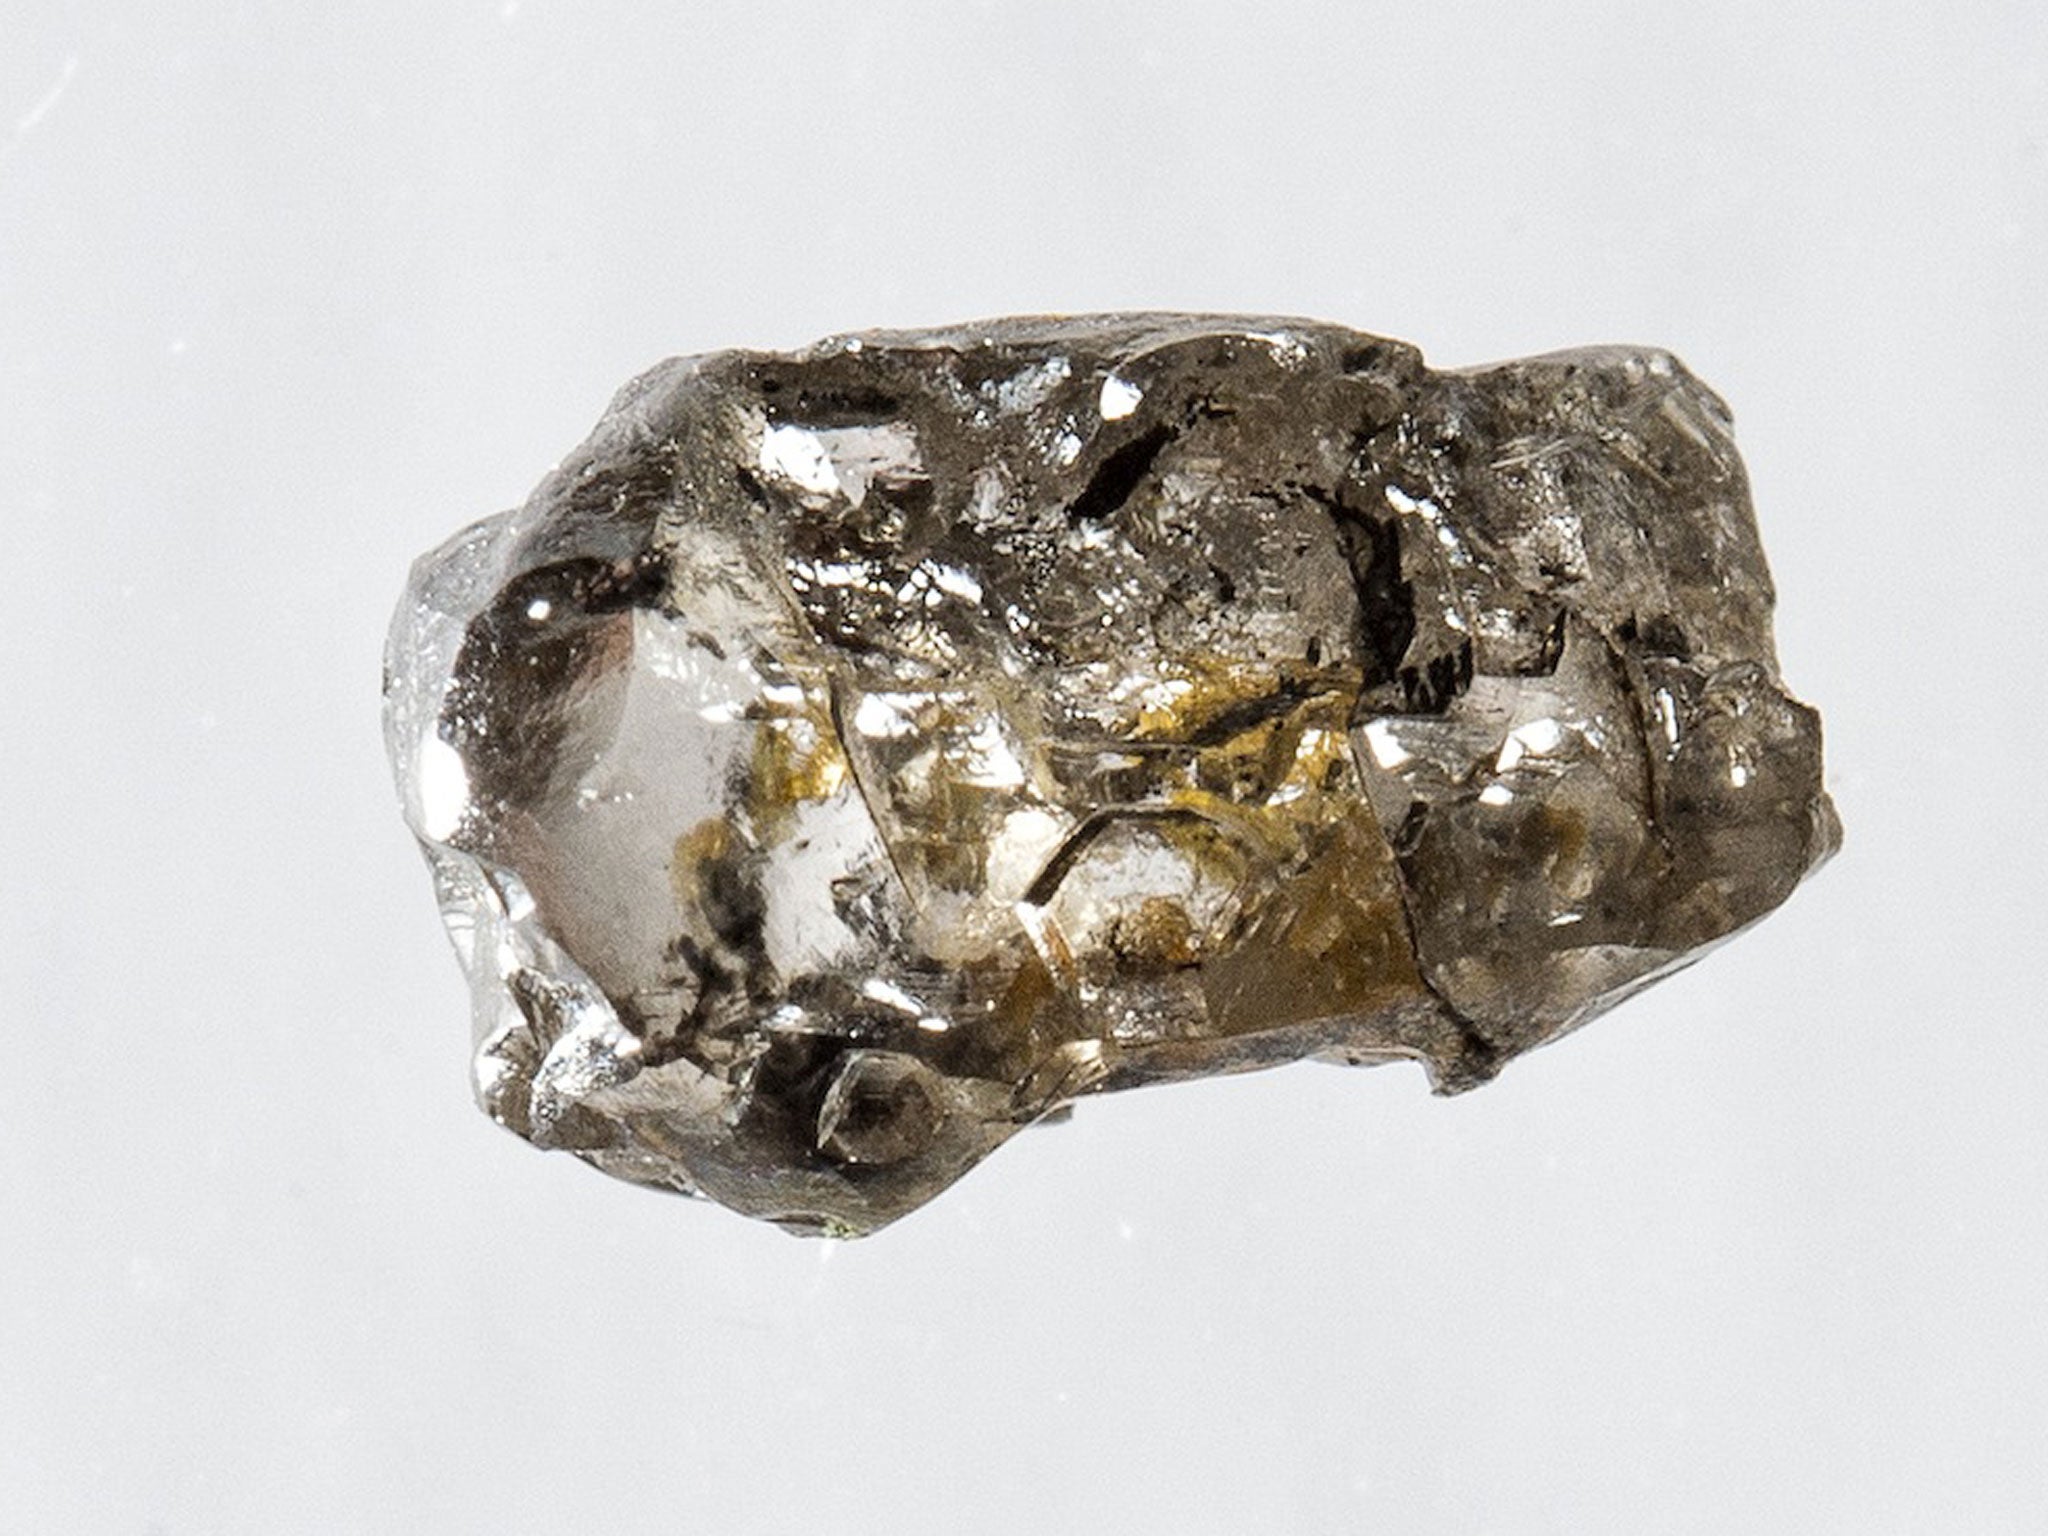 This rare diamond that survived a trip from deep within the Earth's interior has confirmed that beneath the planet’s crust is an ocean’s worth of water